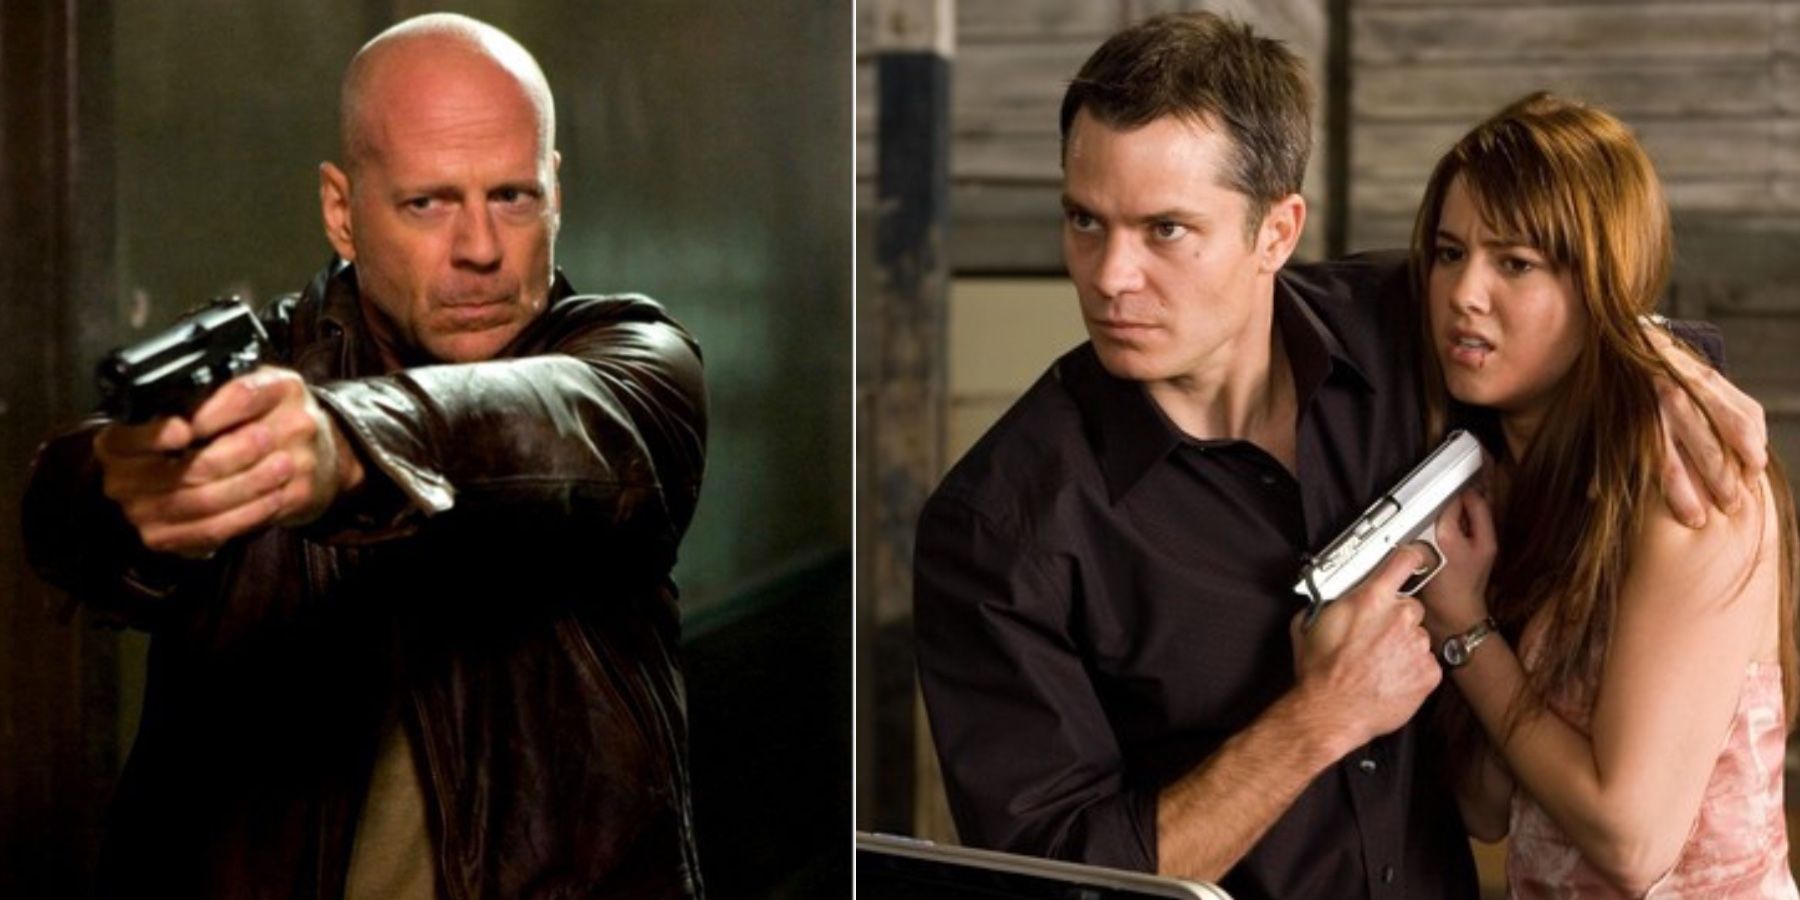 Bruce-Willis-Timothy-Olyphant-and-Mary-Elizabeth-Winstead-in-Live-Free-or-Die-Hard